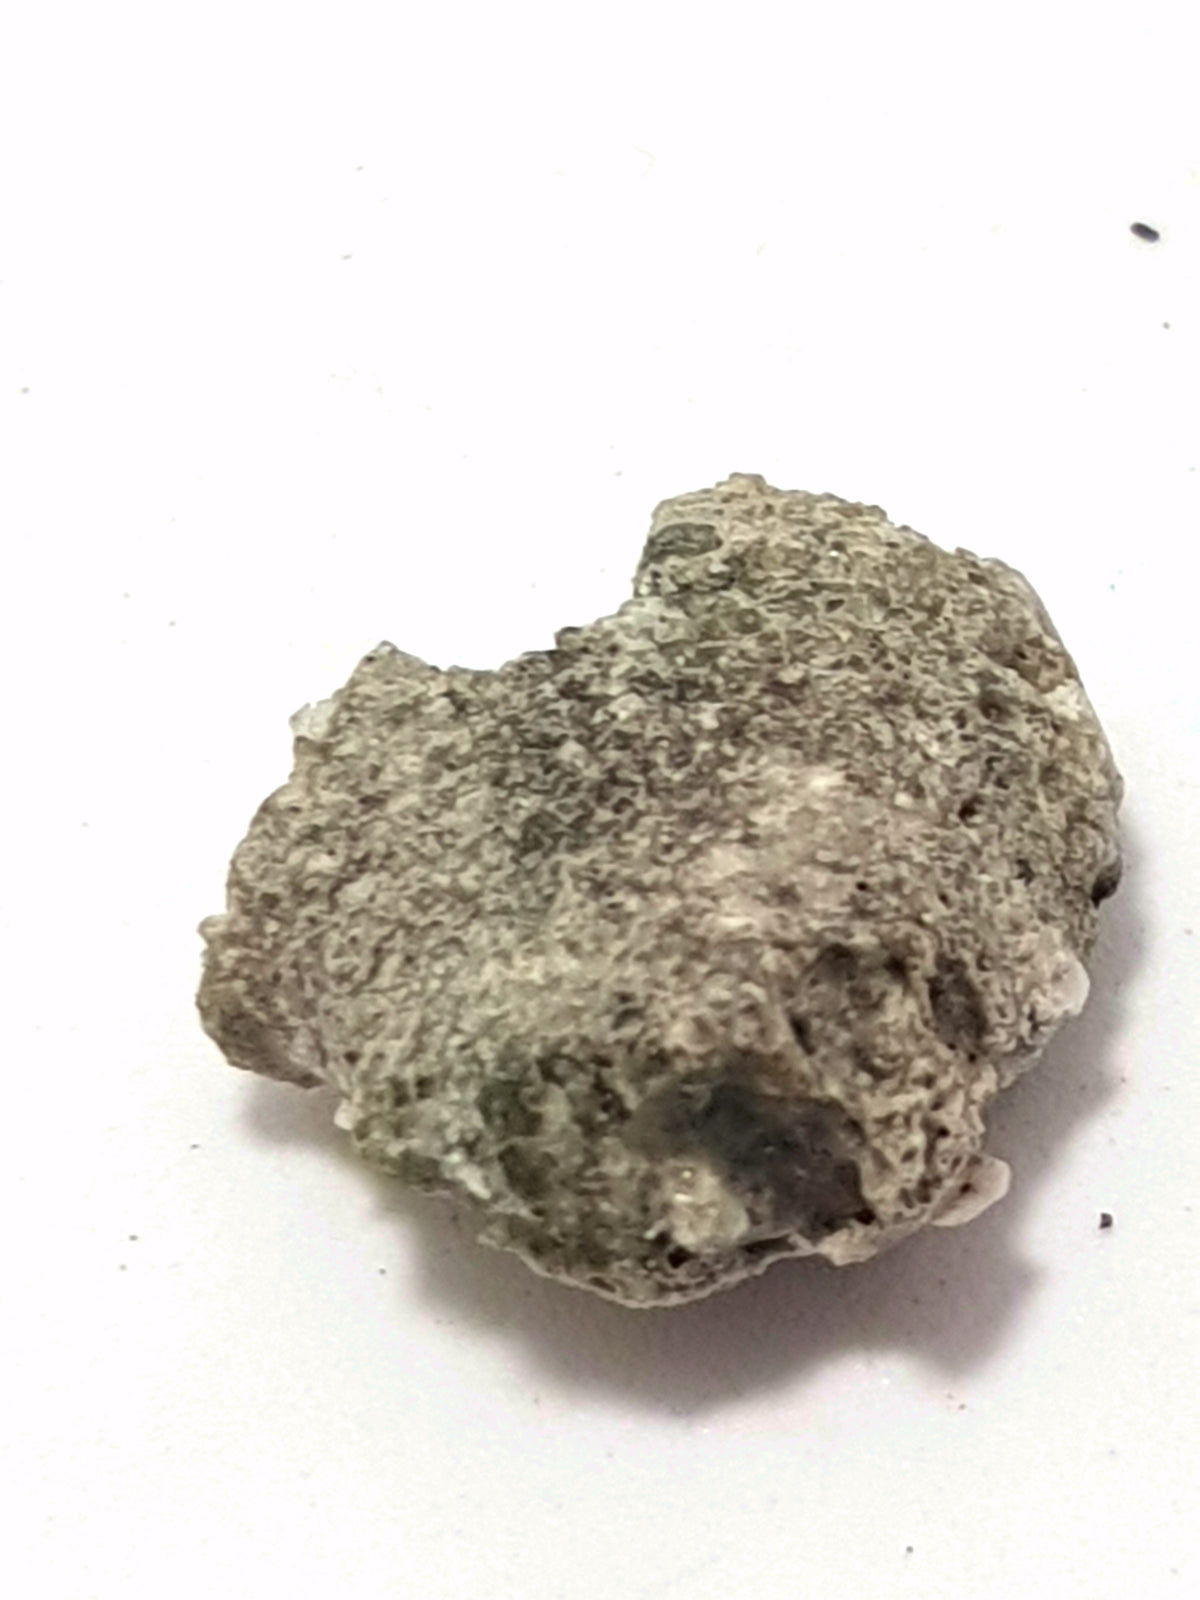 sample of trinitite. It is a single piece. It is dark green/brown. The surface is smooth, but the sample is rough at the edges. It does not appear to have been broken and looks like one single piece.